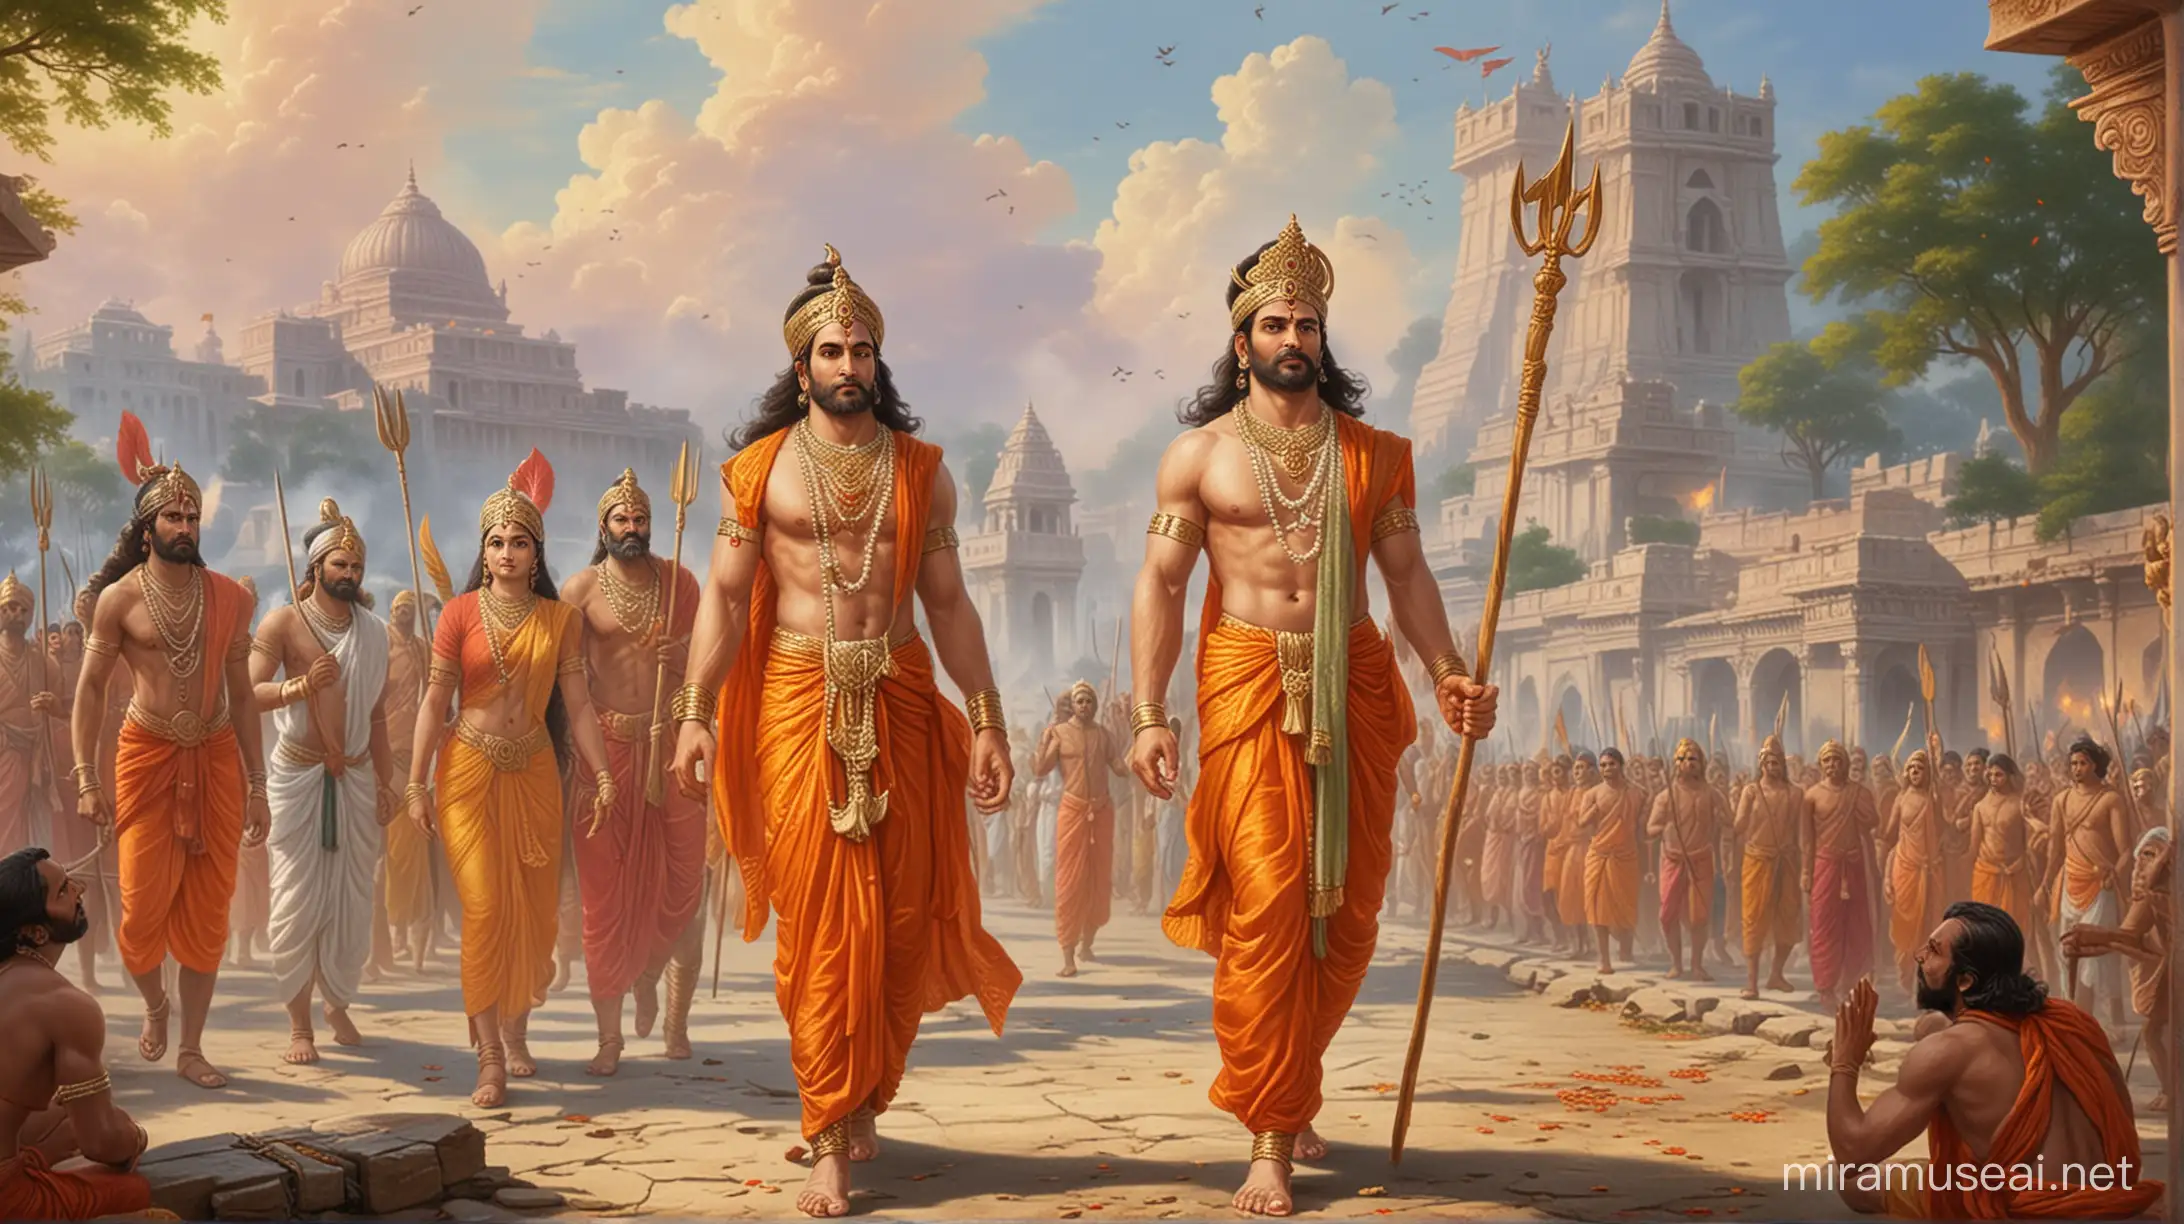 Epic Homecoming Lord Ramas Triumphant Return to Ayodhya with Sita